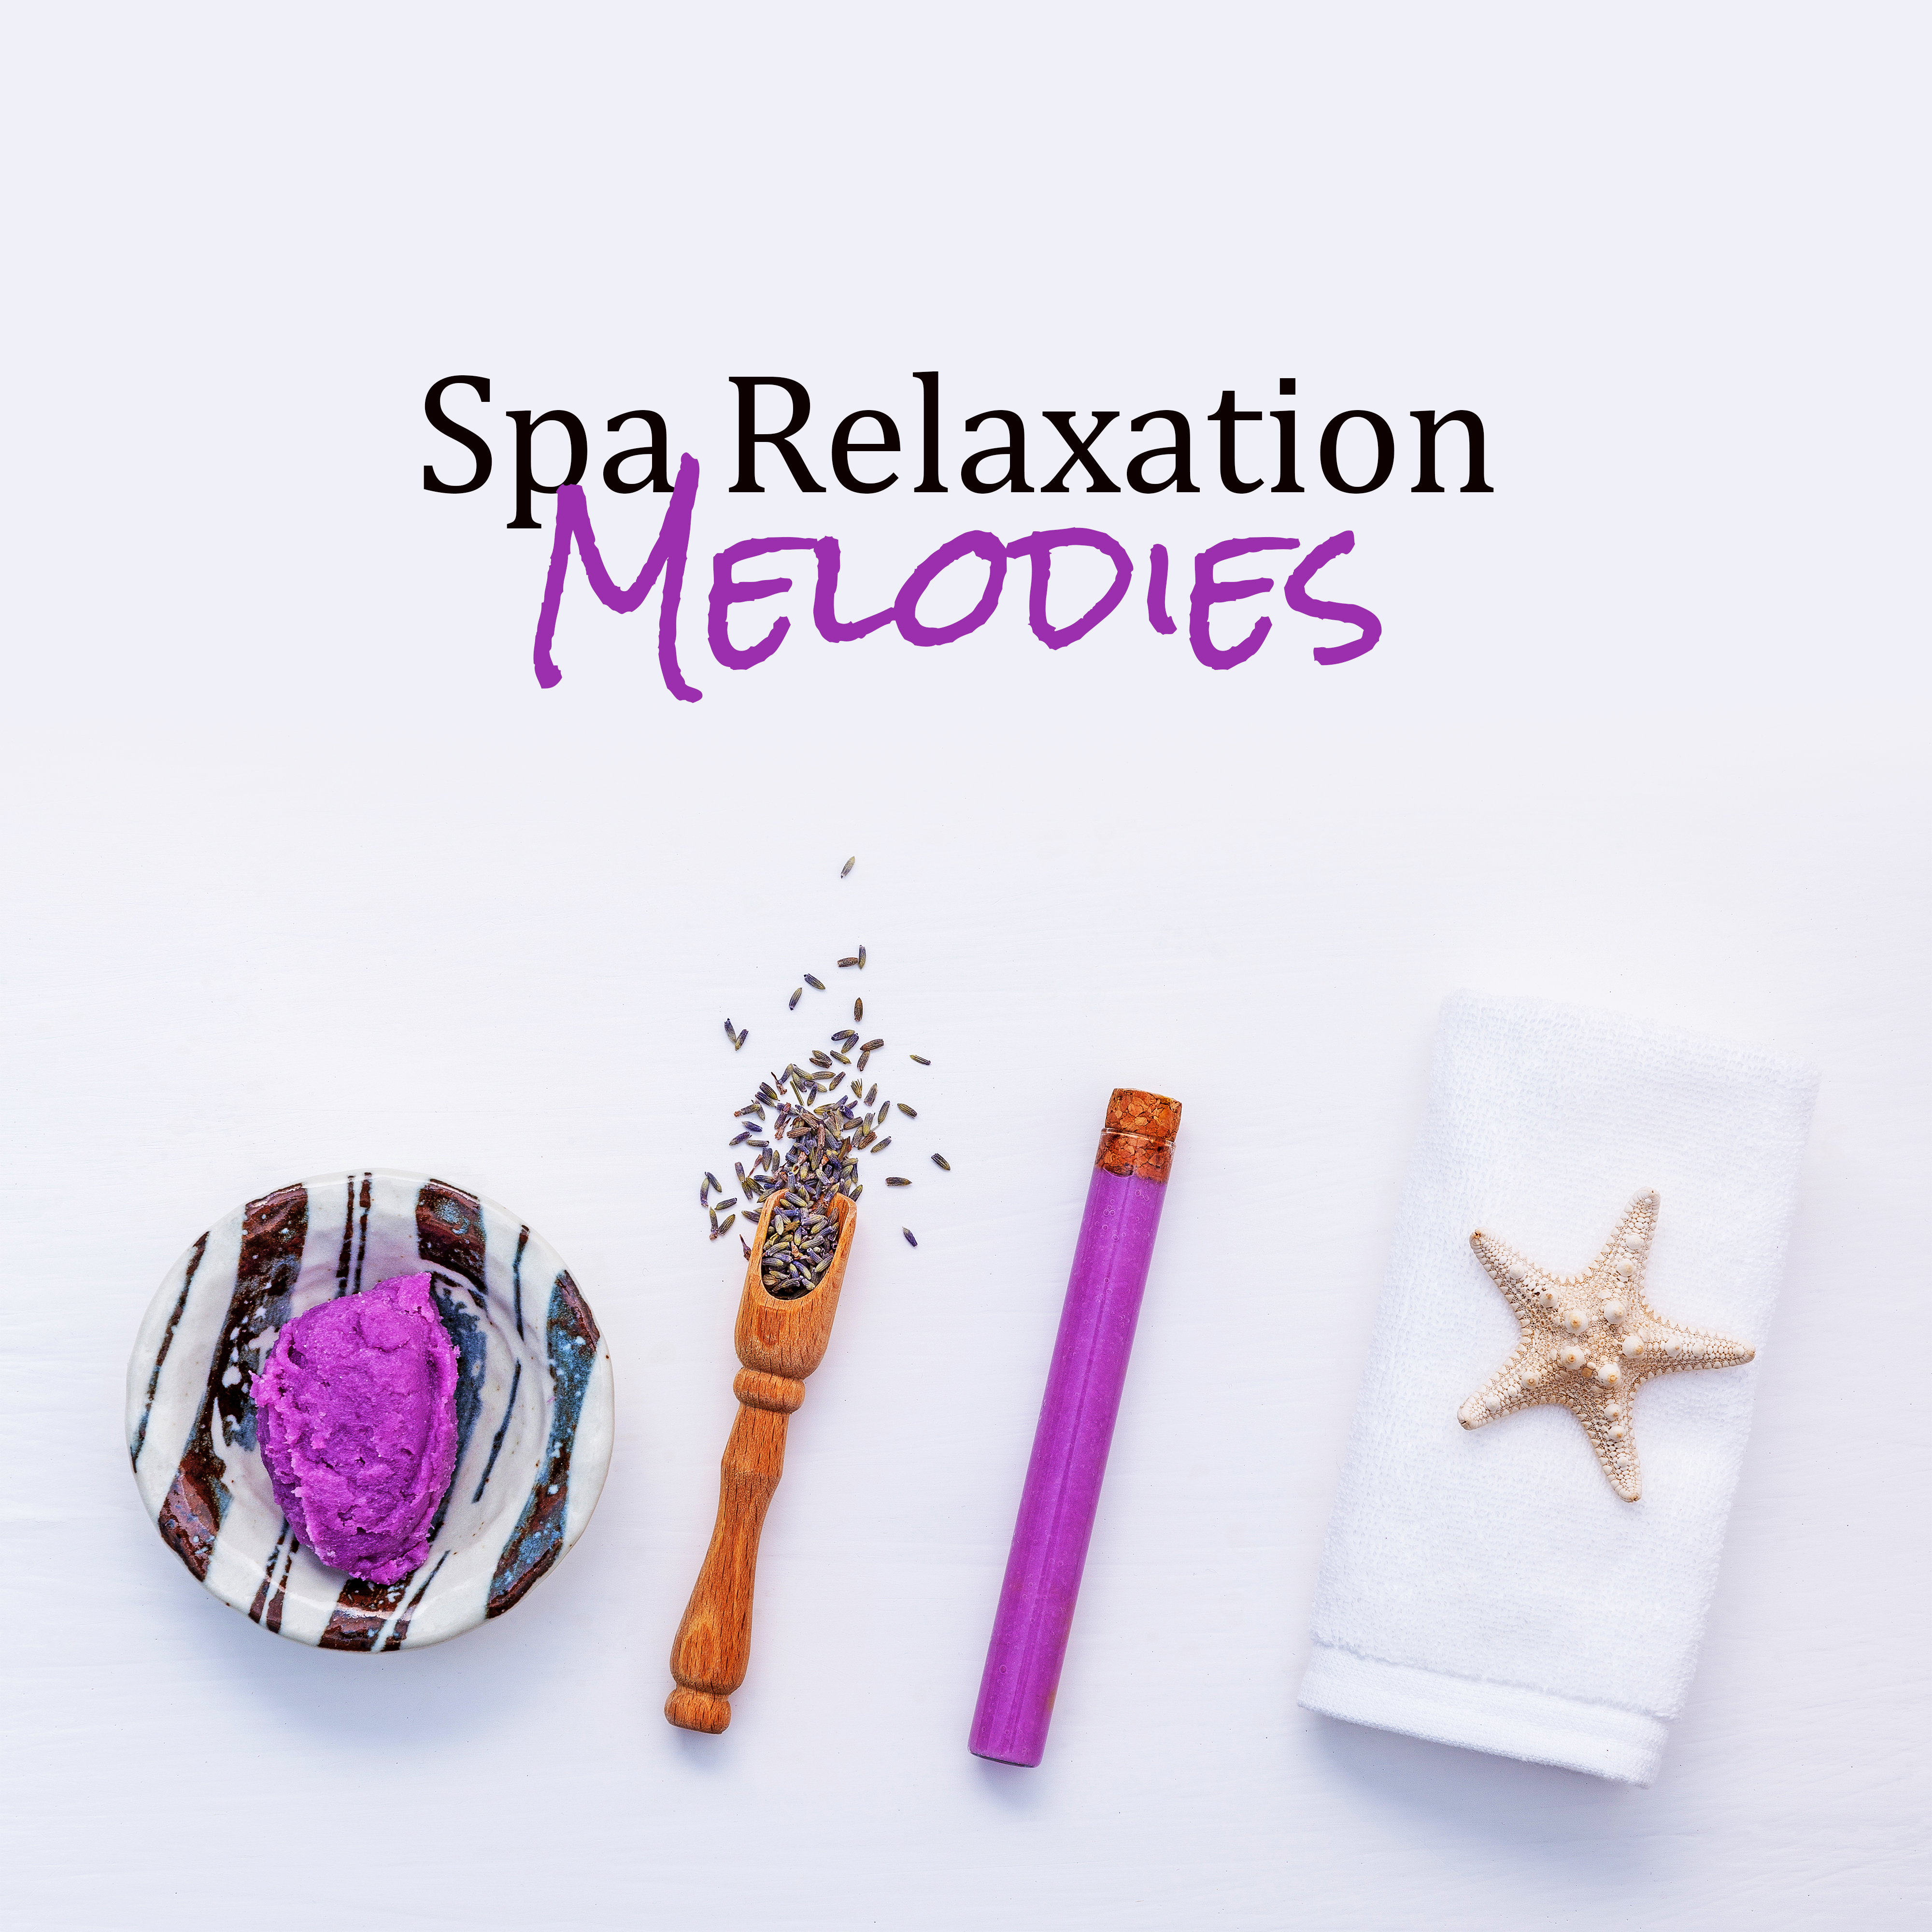 Spa Relaxation Melodies